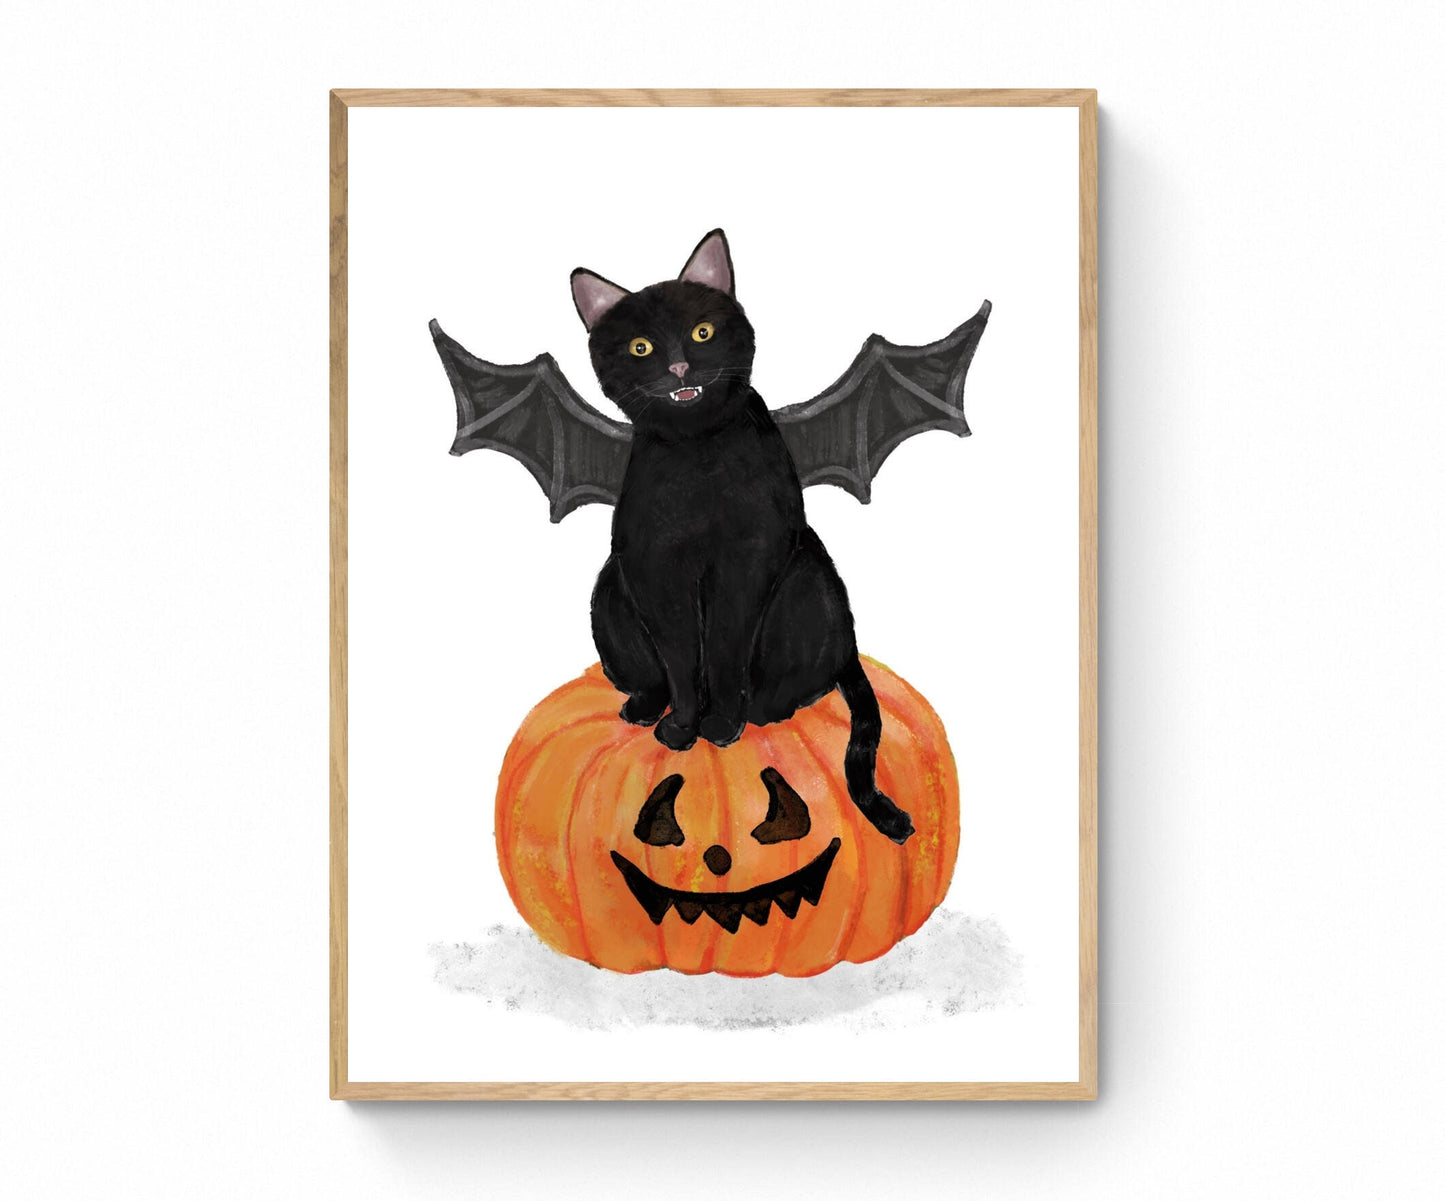 Black Cat with Fangs and Wings on Pumpkin Print, Halloween Cat Painting, Black Cat Portrait, Holiday Wall Art, Black Cat With Big Eyes